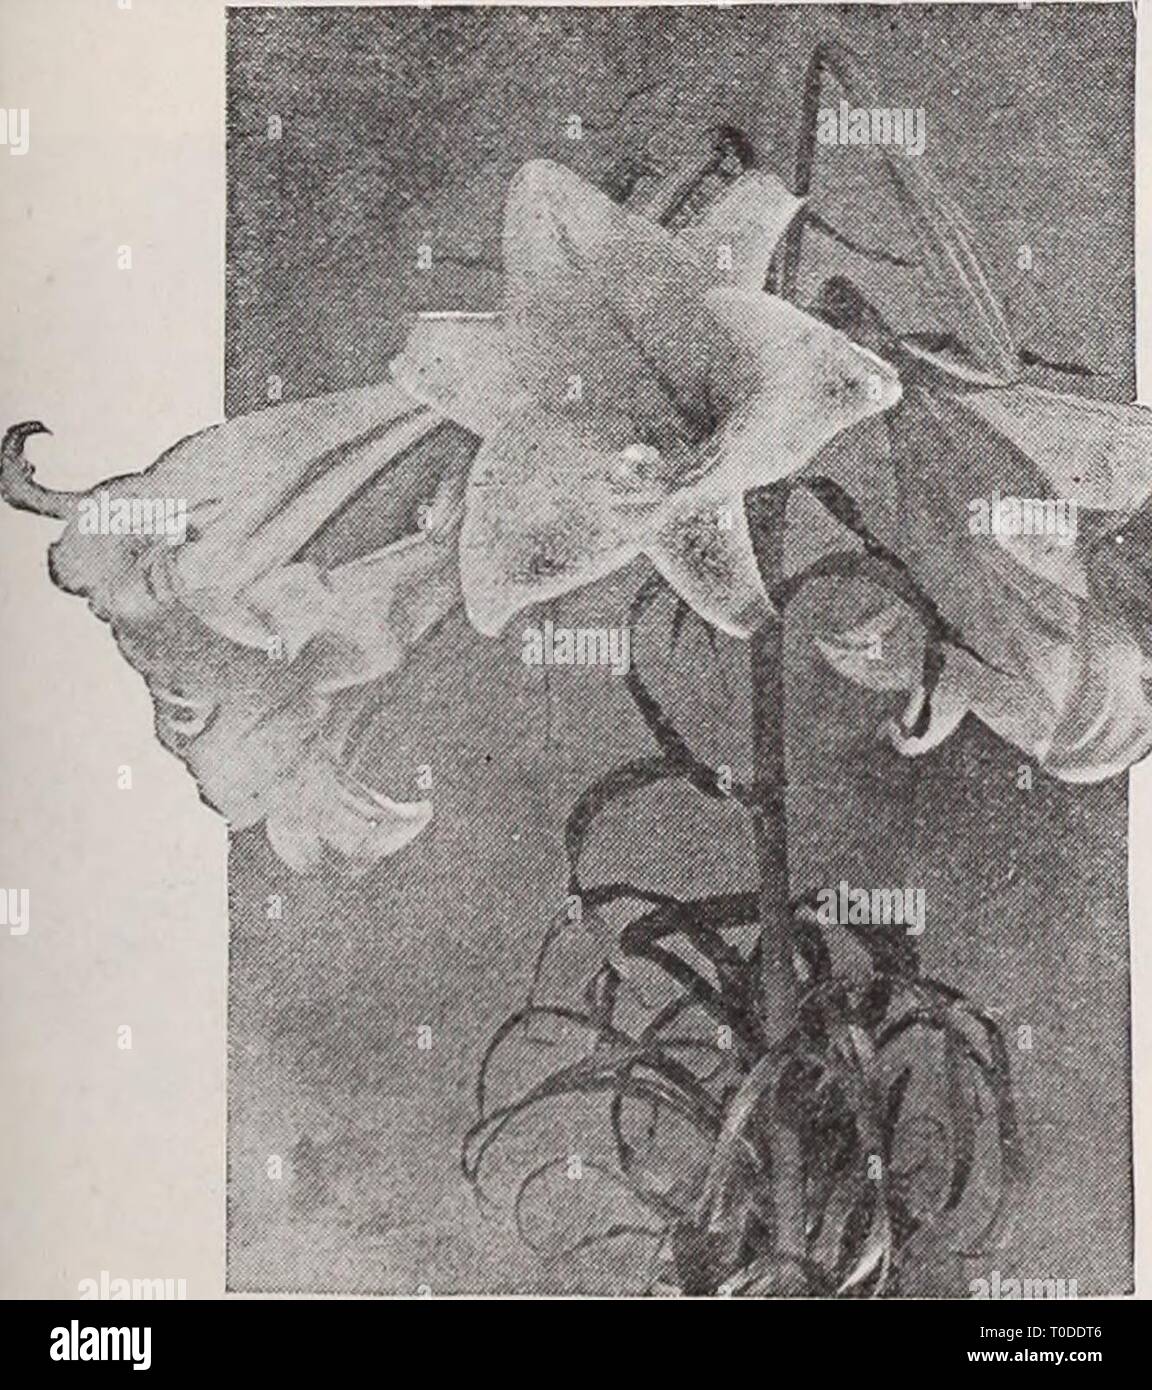 Dreer's garden book  Henry Dreer's garden book / Henry A. Dreer. dreersgardenbook1931dree Year:   Giant Imperial Larkspur Three Lovely Pink Double Annual Larkspurs 2936 Exquisite Pink Improved. A greatly im- proved strain both in the upright habit of growth and in the charming pink color, which comes practically 100 per cent. true, j oz., 40 PER PKT. cts. .$0 10 Lilium Piiilippinense Formosanum 2934 Exquisite Rose. Identical in every way to the foregoing but several tones deeper in color, being a rich rose pink that comes quite true.  oz., 40 cts 10 2945 Miss California {New). Of the new upri Stock Photo